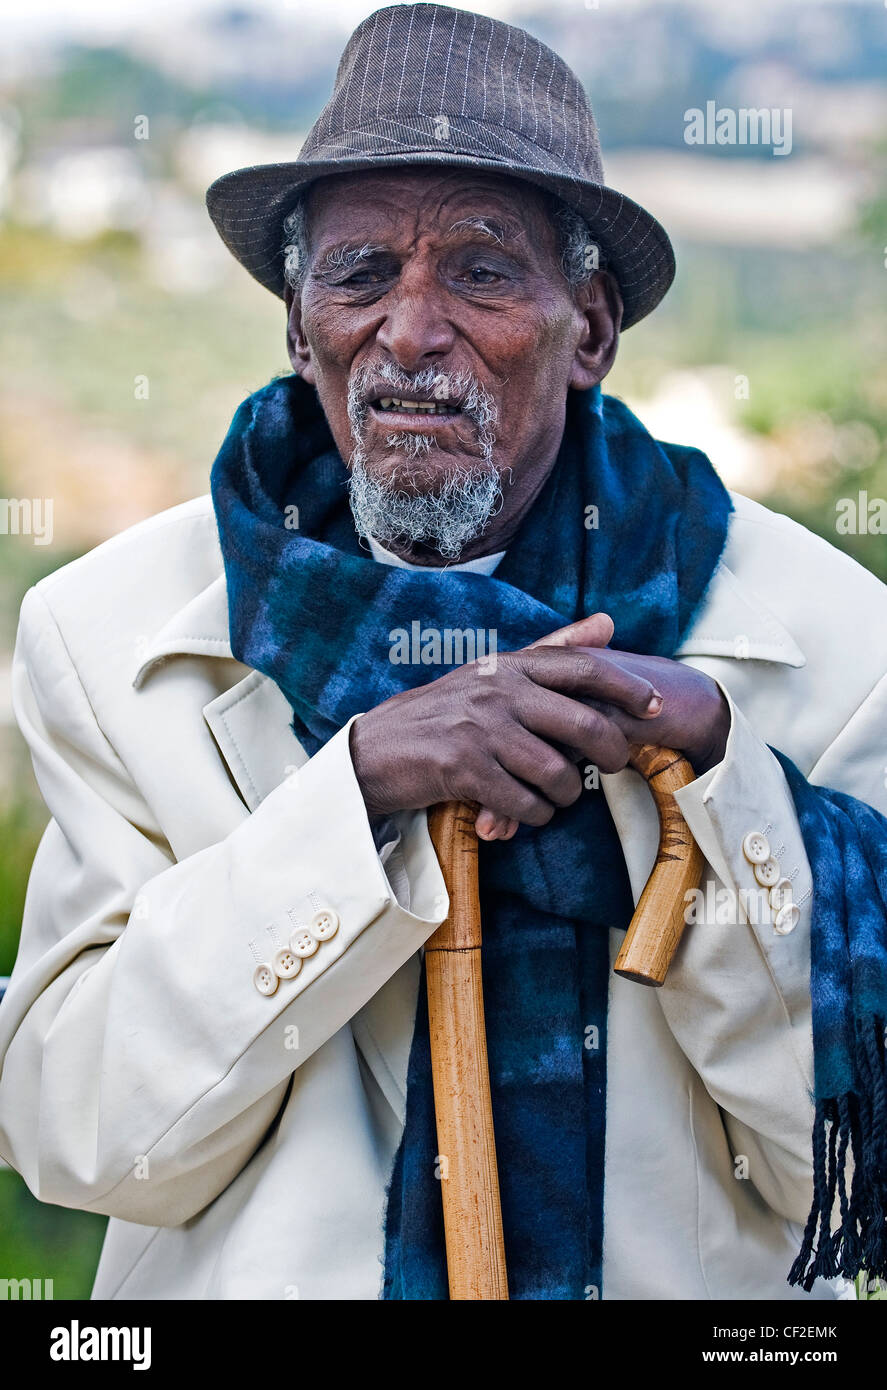 Portrait of Ethiopian Jew man during the 'Sigd' holiday in Jerusalem Stock Photo